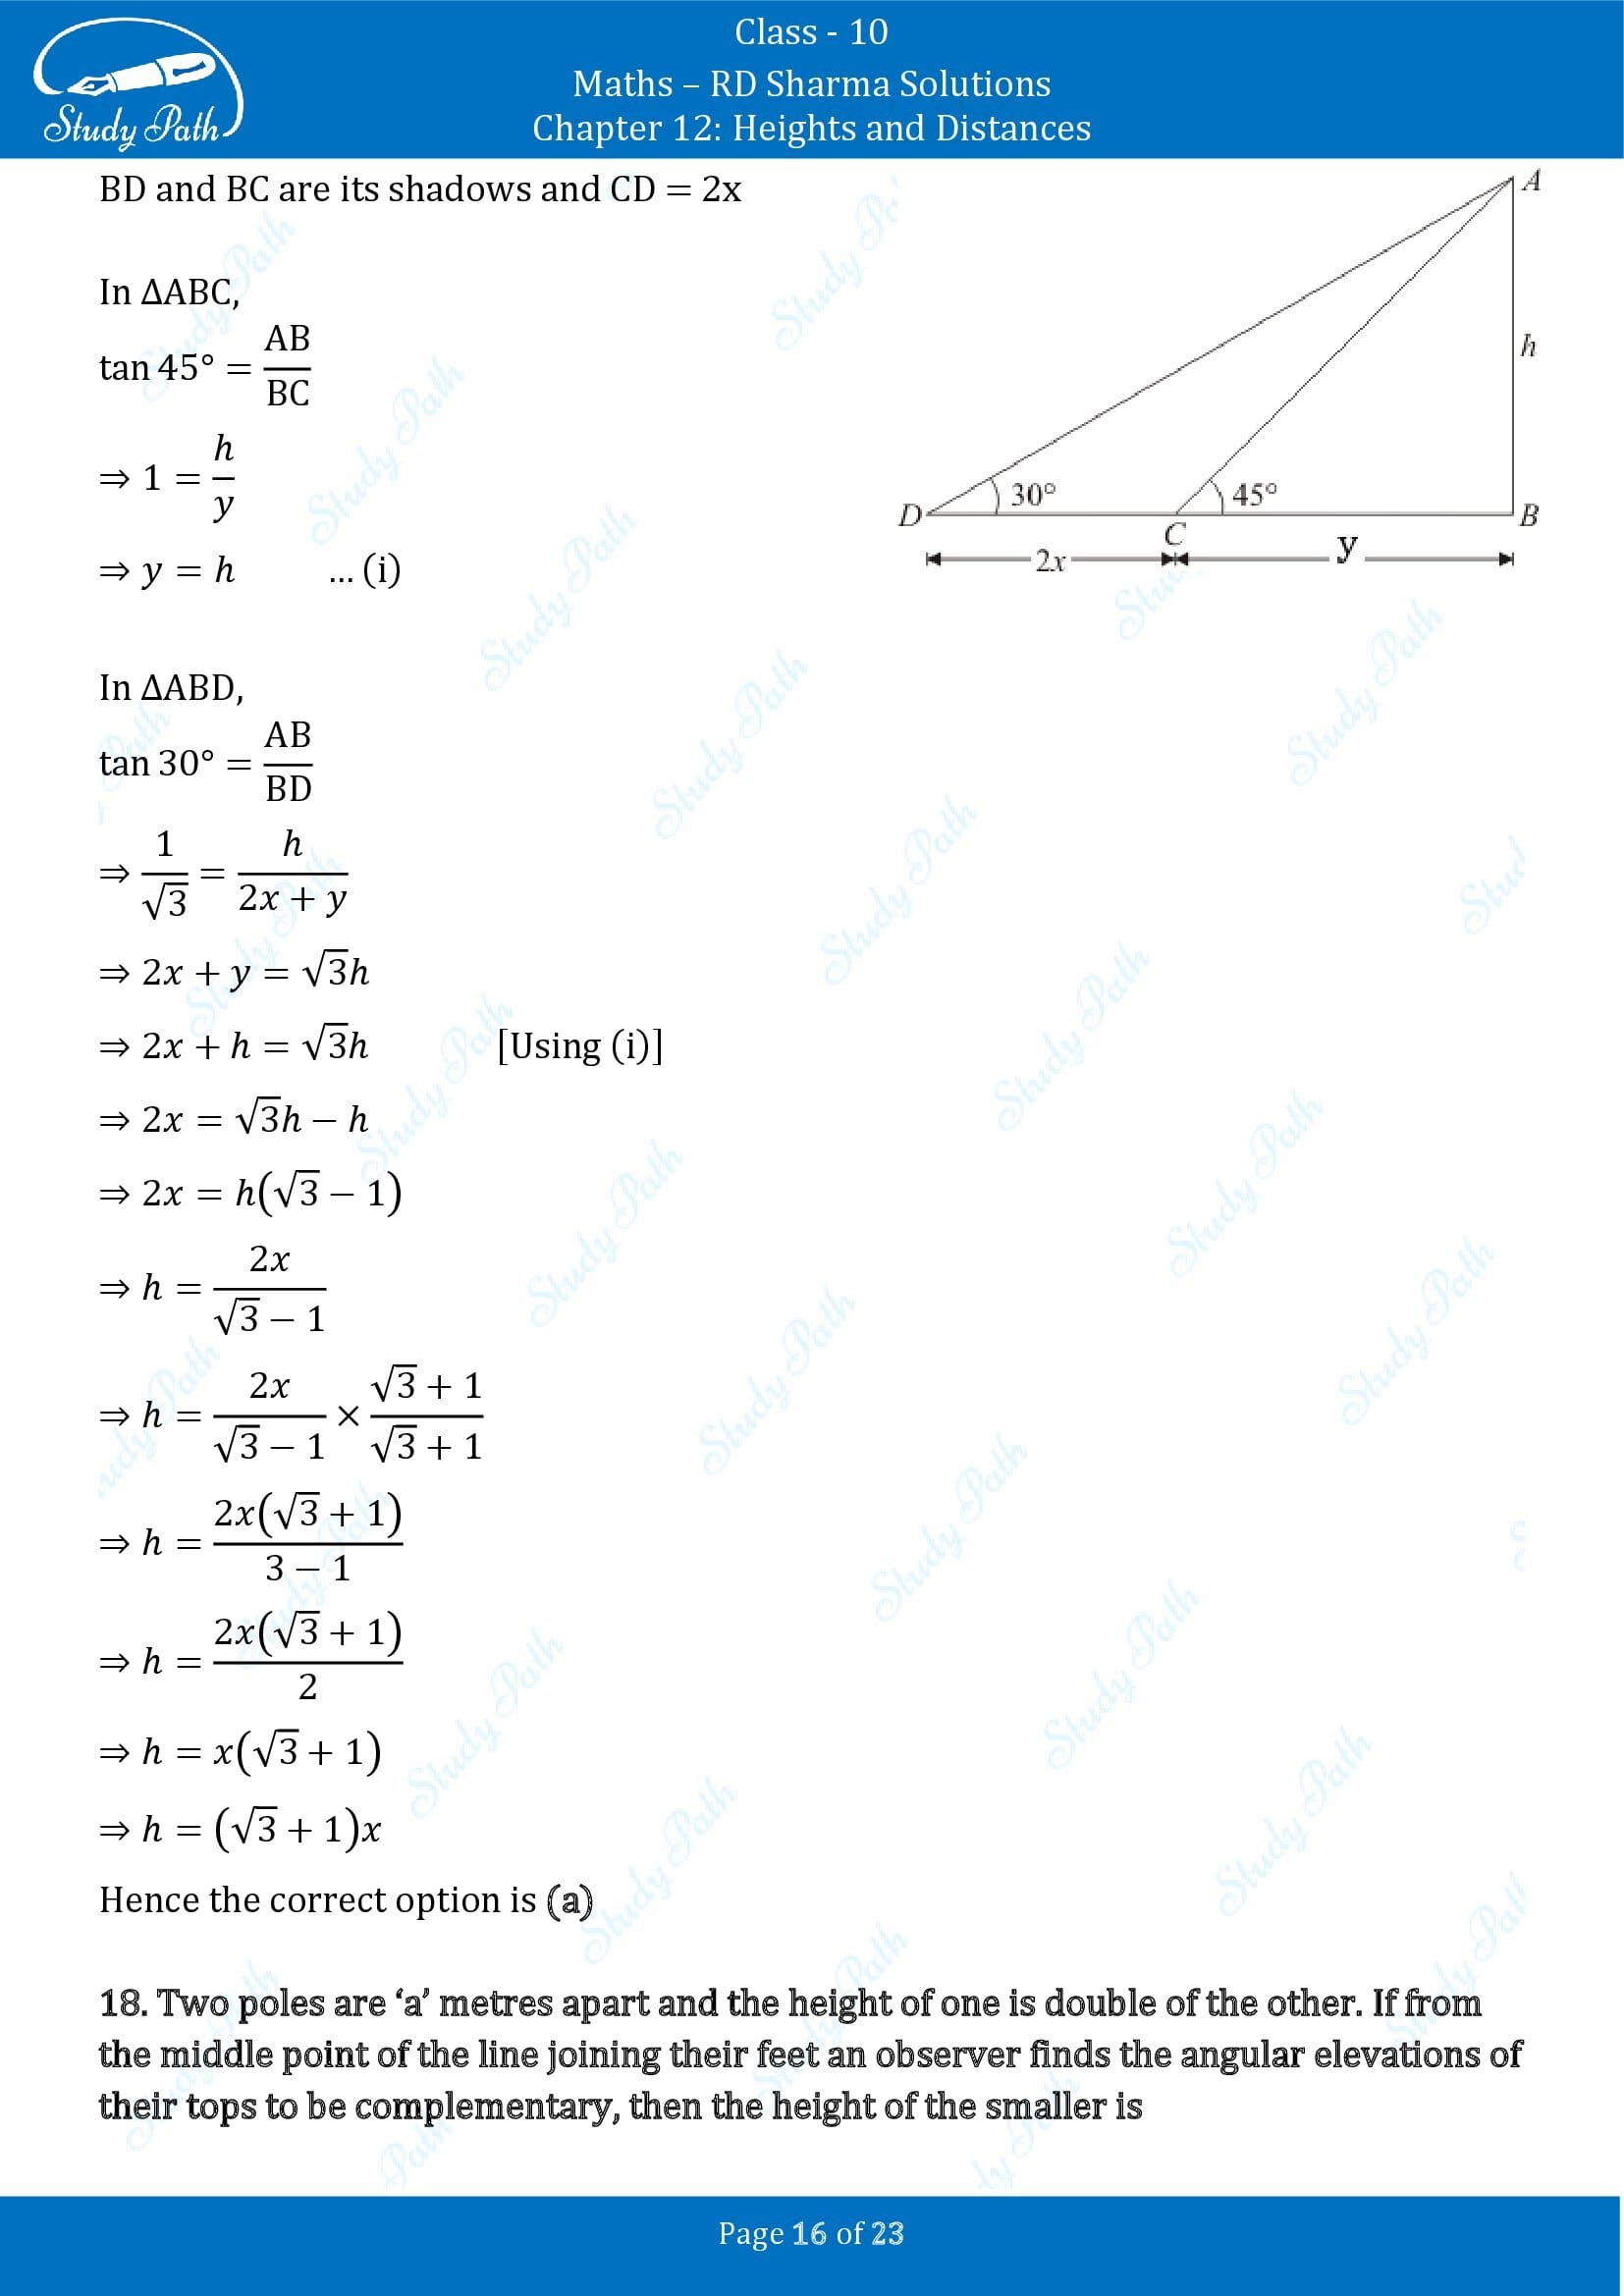 RD Sharma Solutions Class 10 Chapter 12 Heights and Distances Multiple Choice Question MCQs 00016